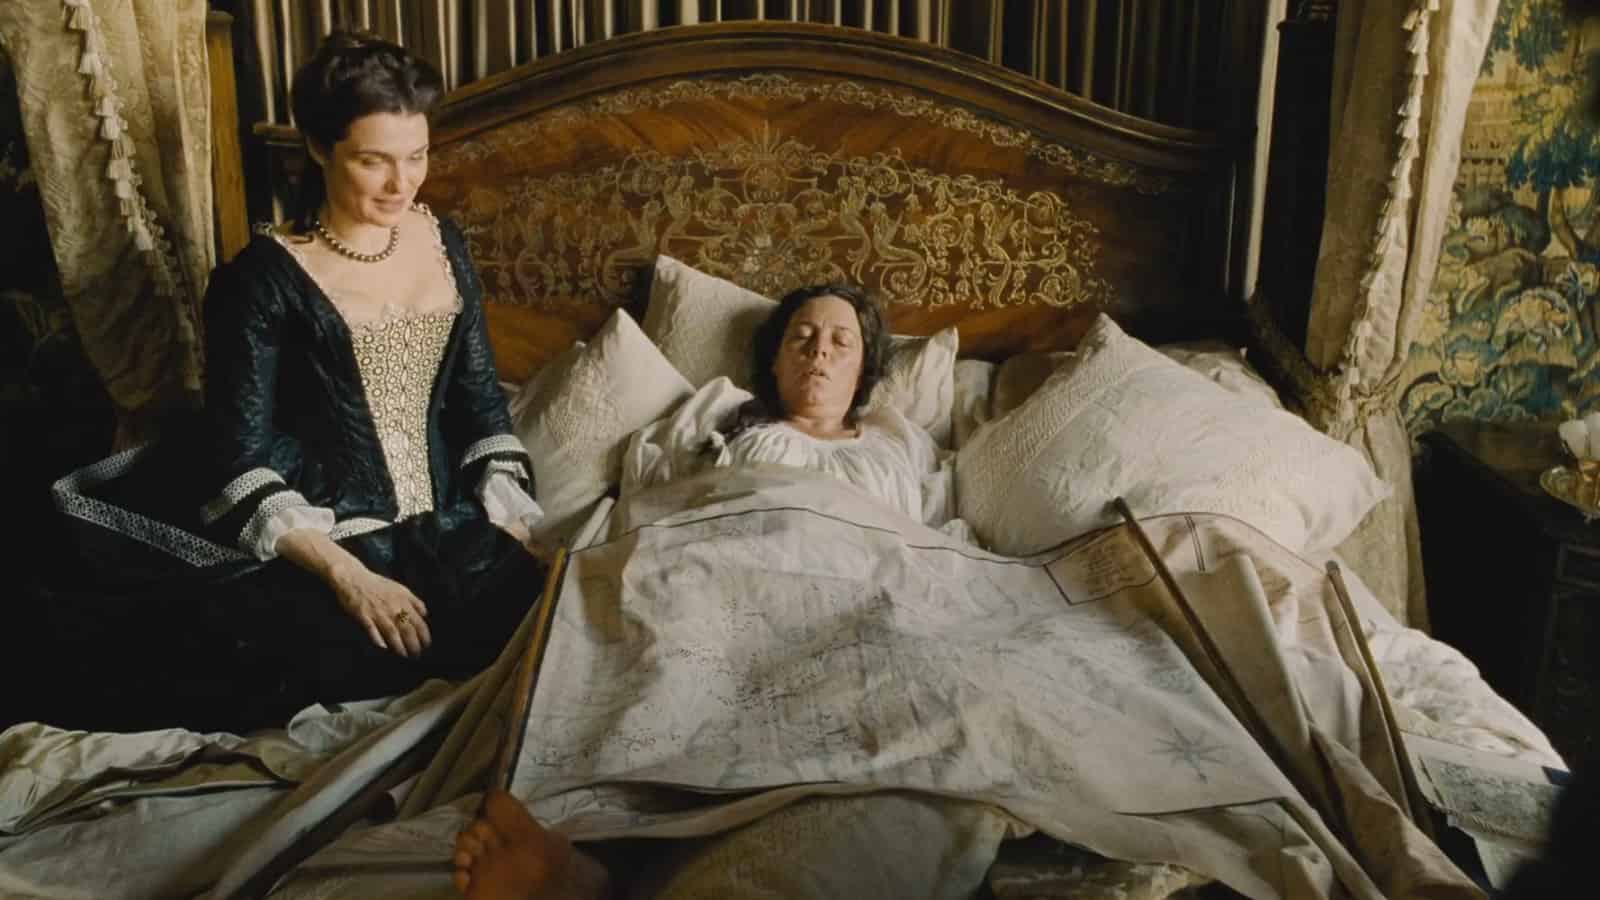 Sarah and the Queen in the movie 'The Favourite' 